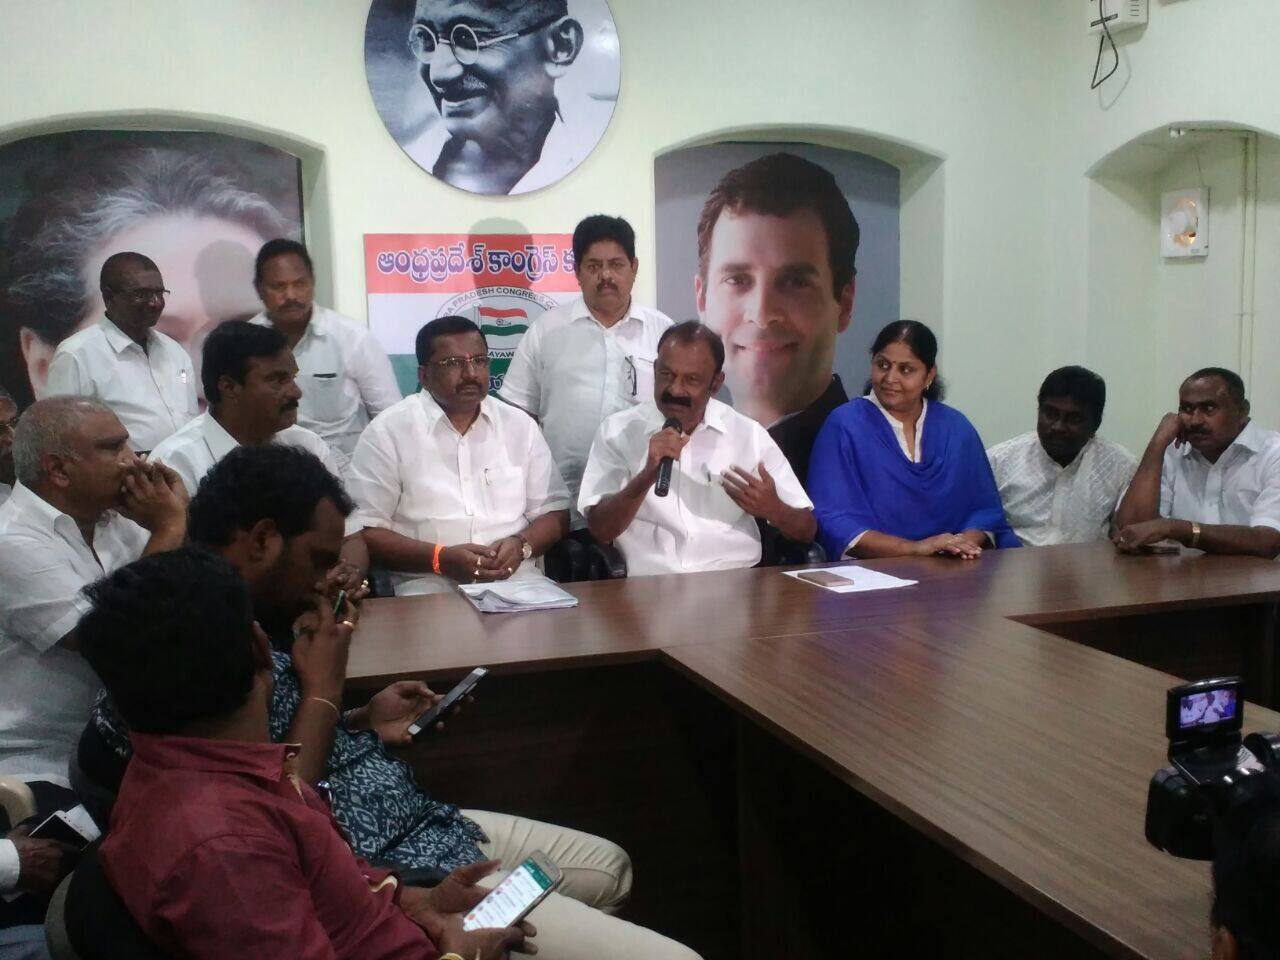 TDPs Varla and Congress Raghuvira accuse each others party as waste